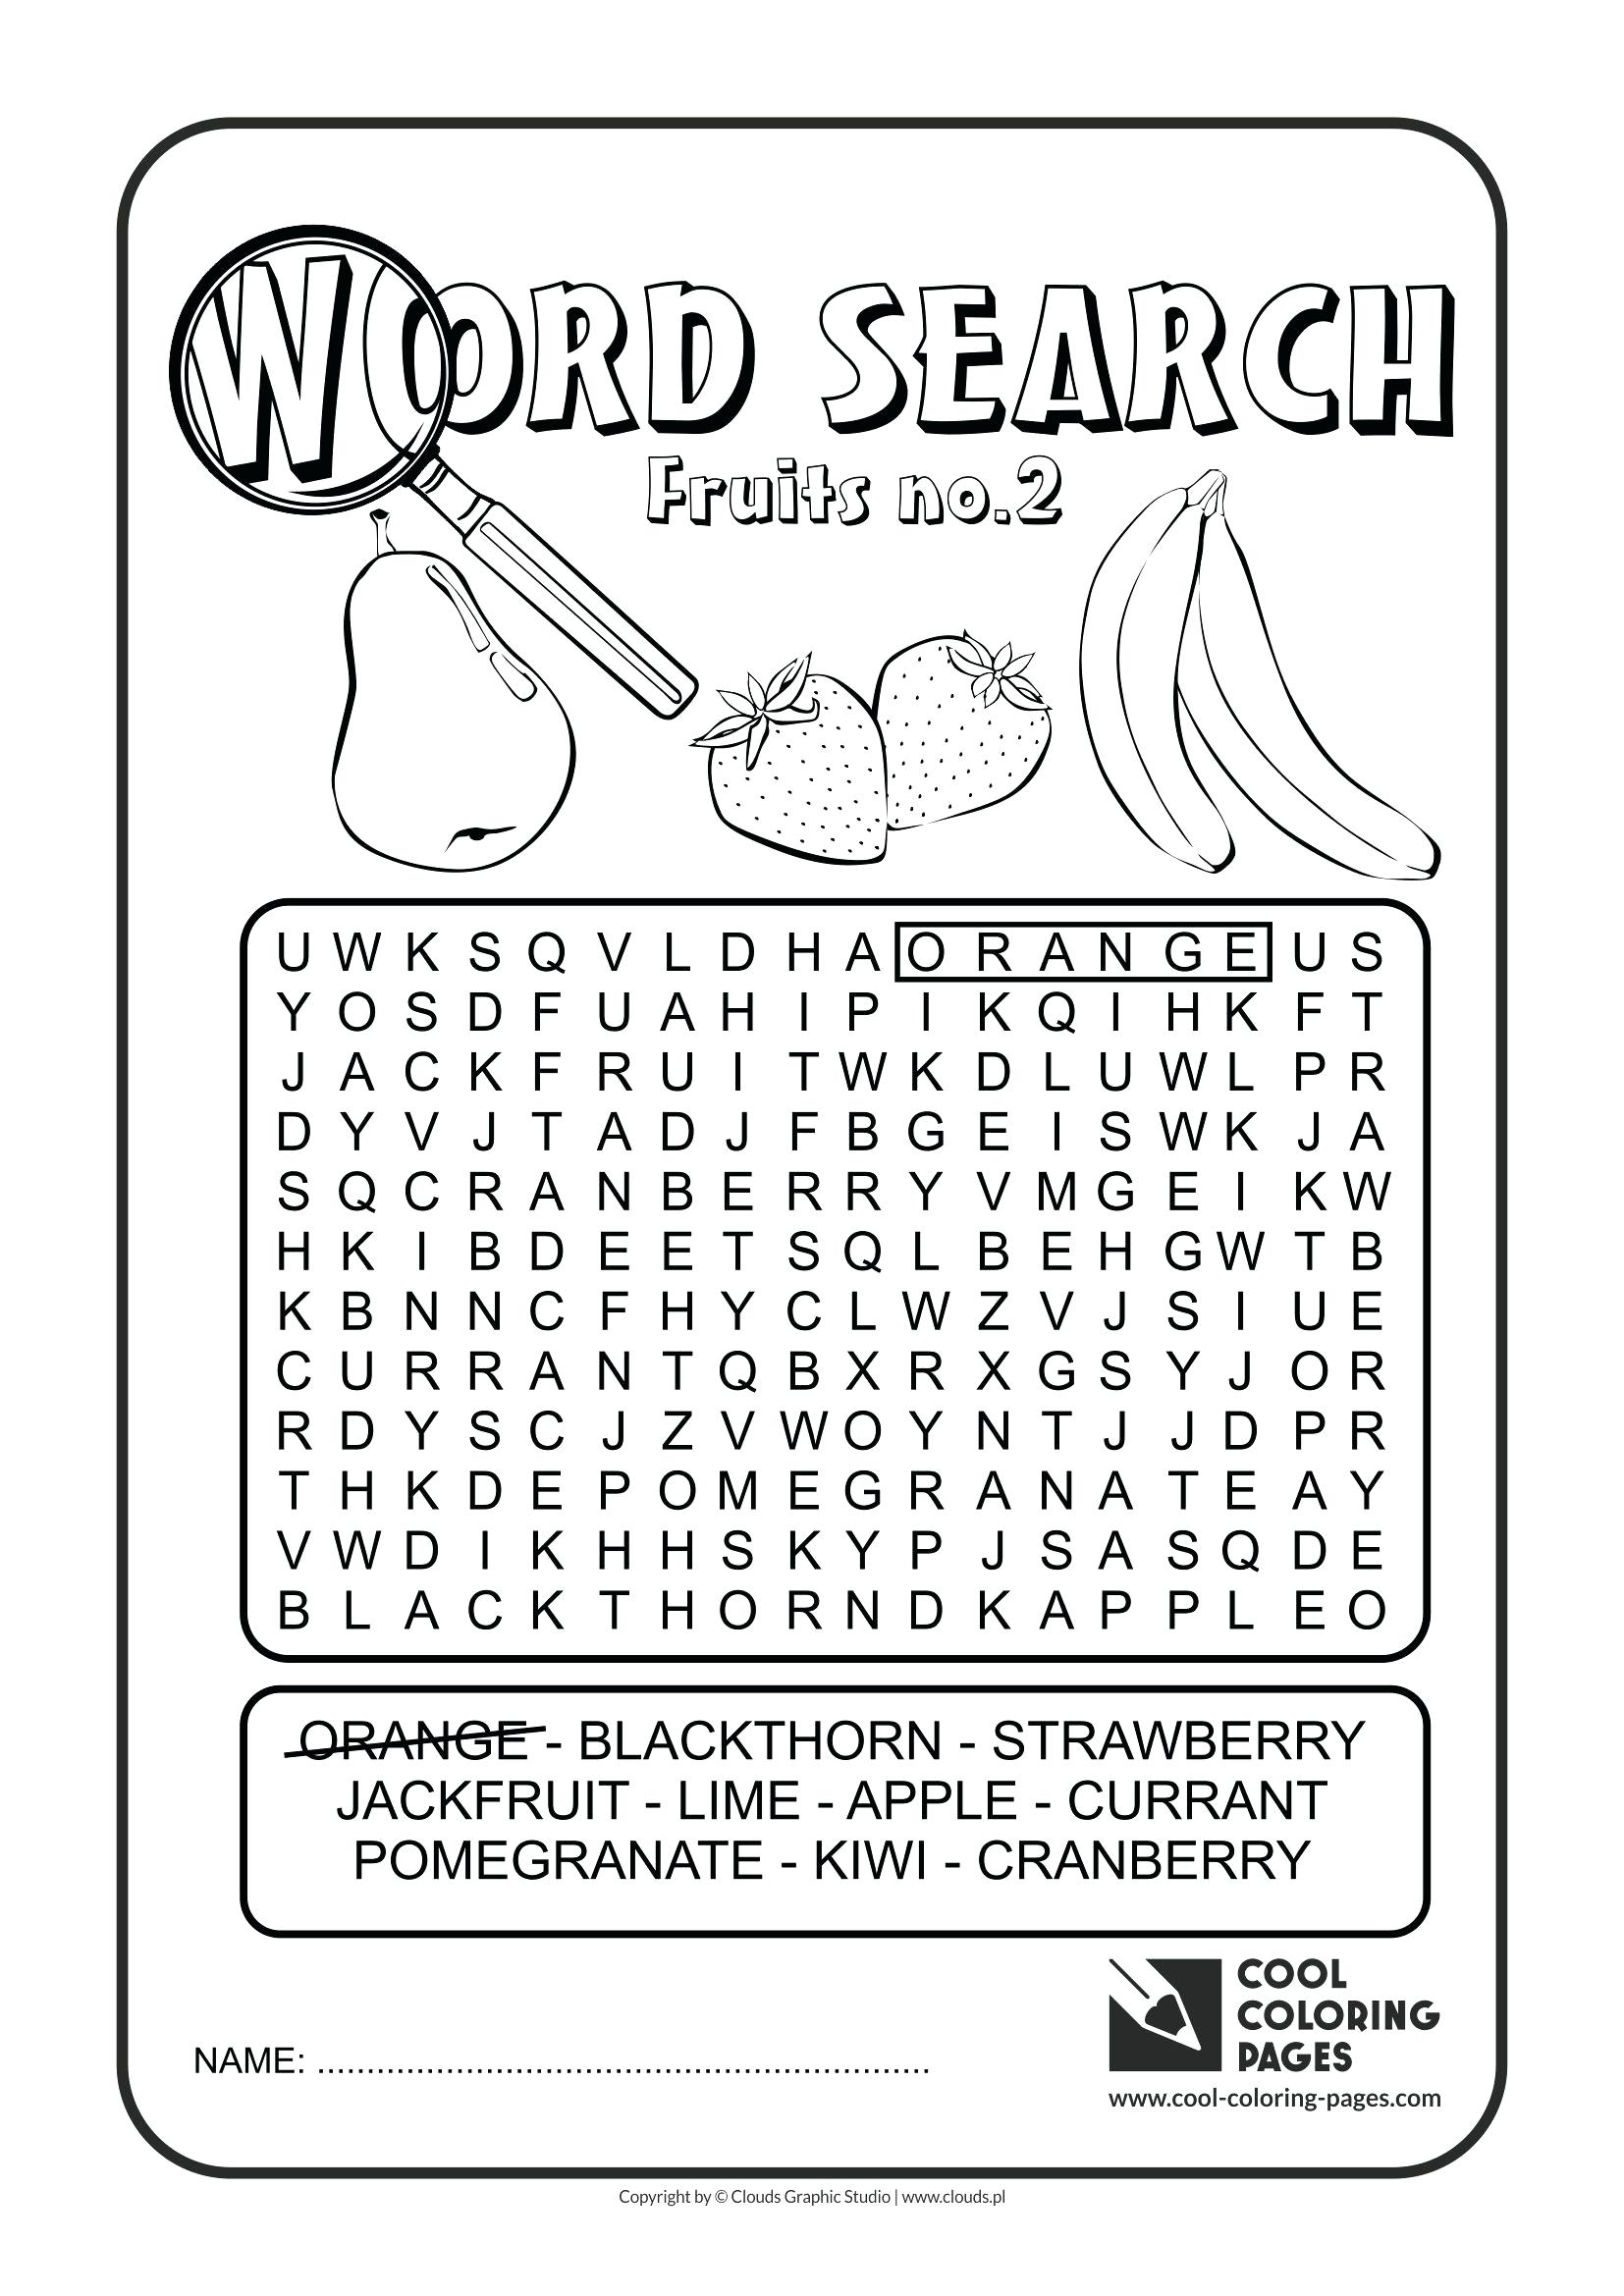 Word Search Coloring Pages Free Coloring Pages Word Search Crunchprintco